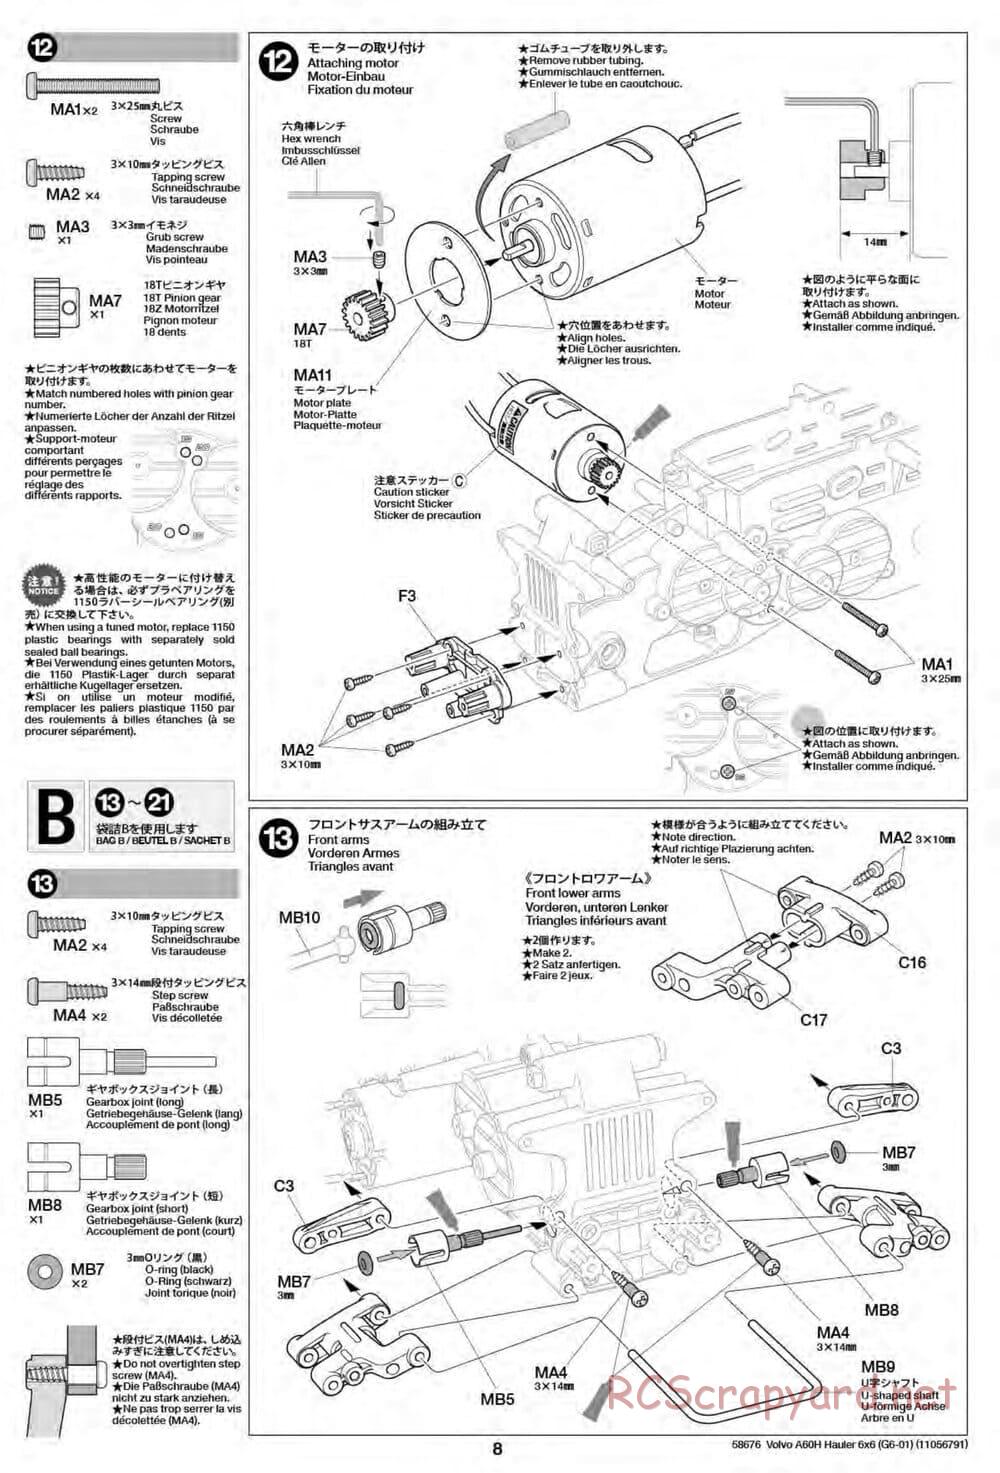 Tamiya - Volvo A60H Dump Truck 6x6 - G6-01 Chassis - Manual - Page 7